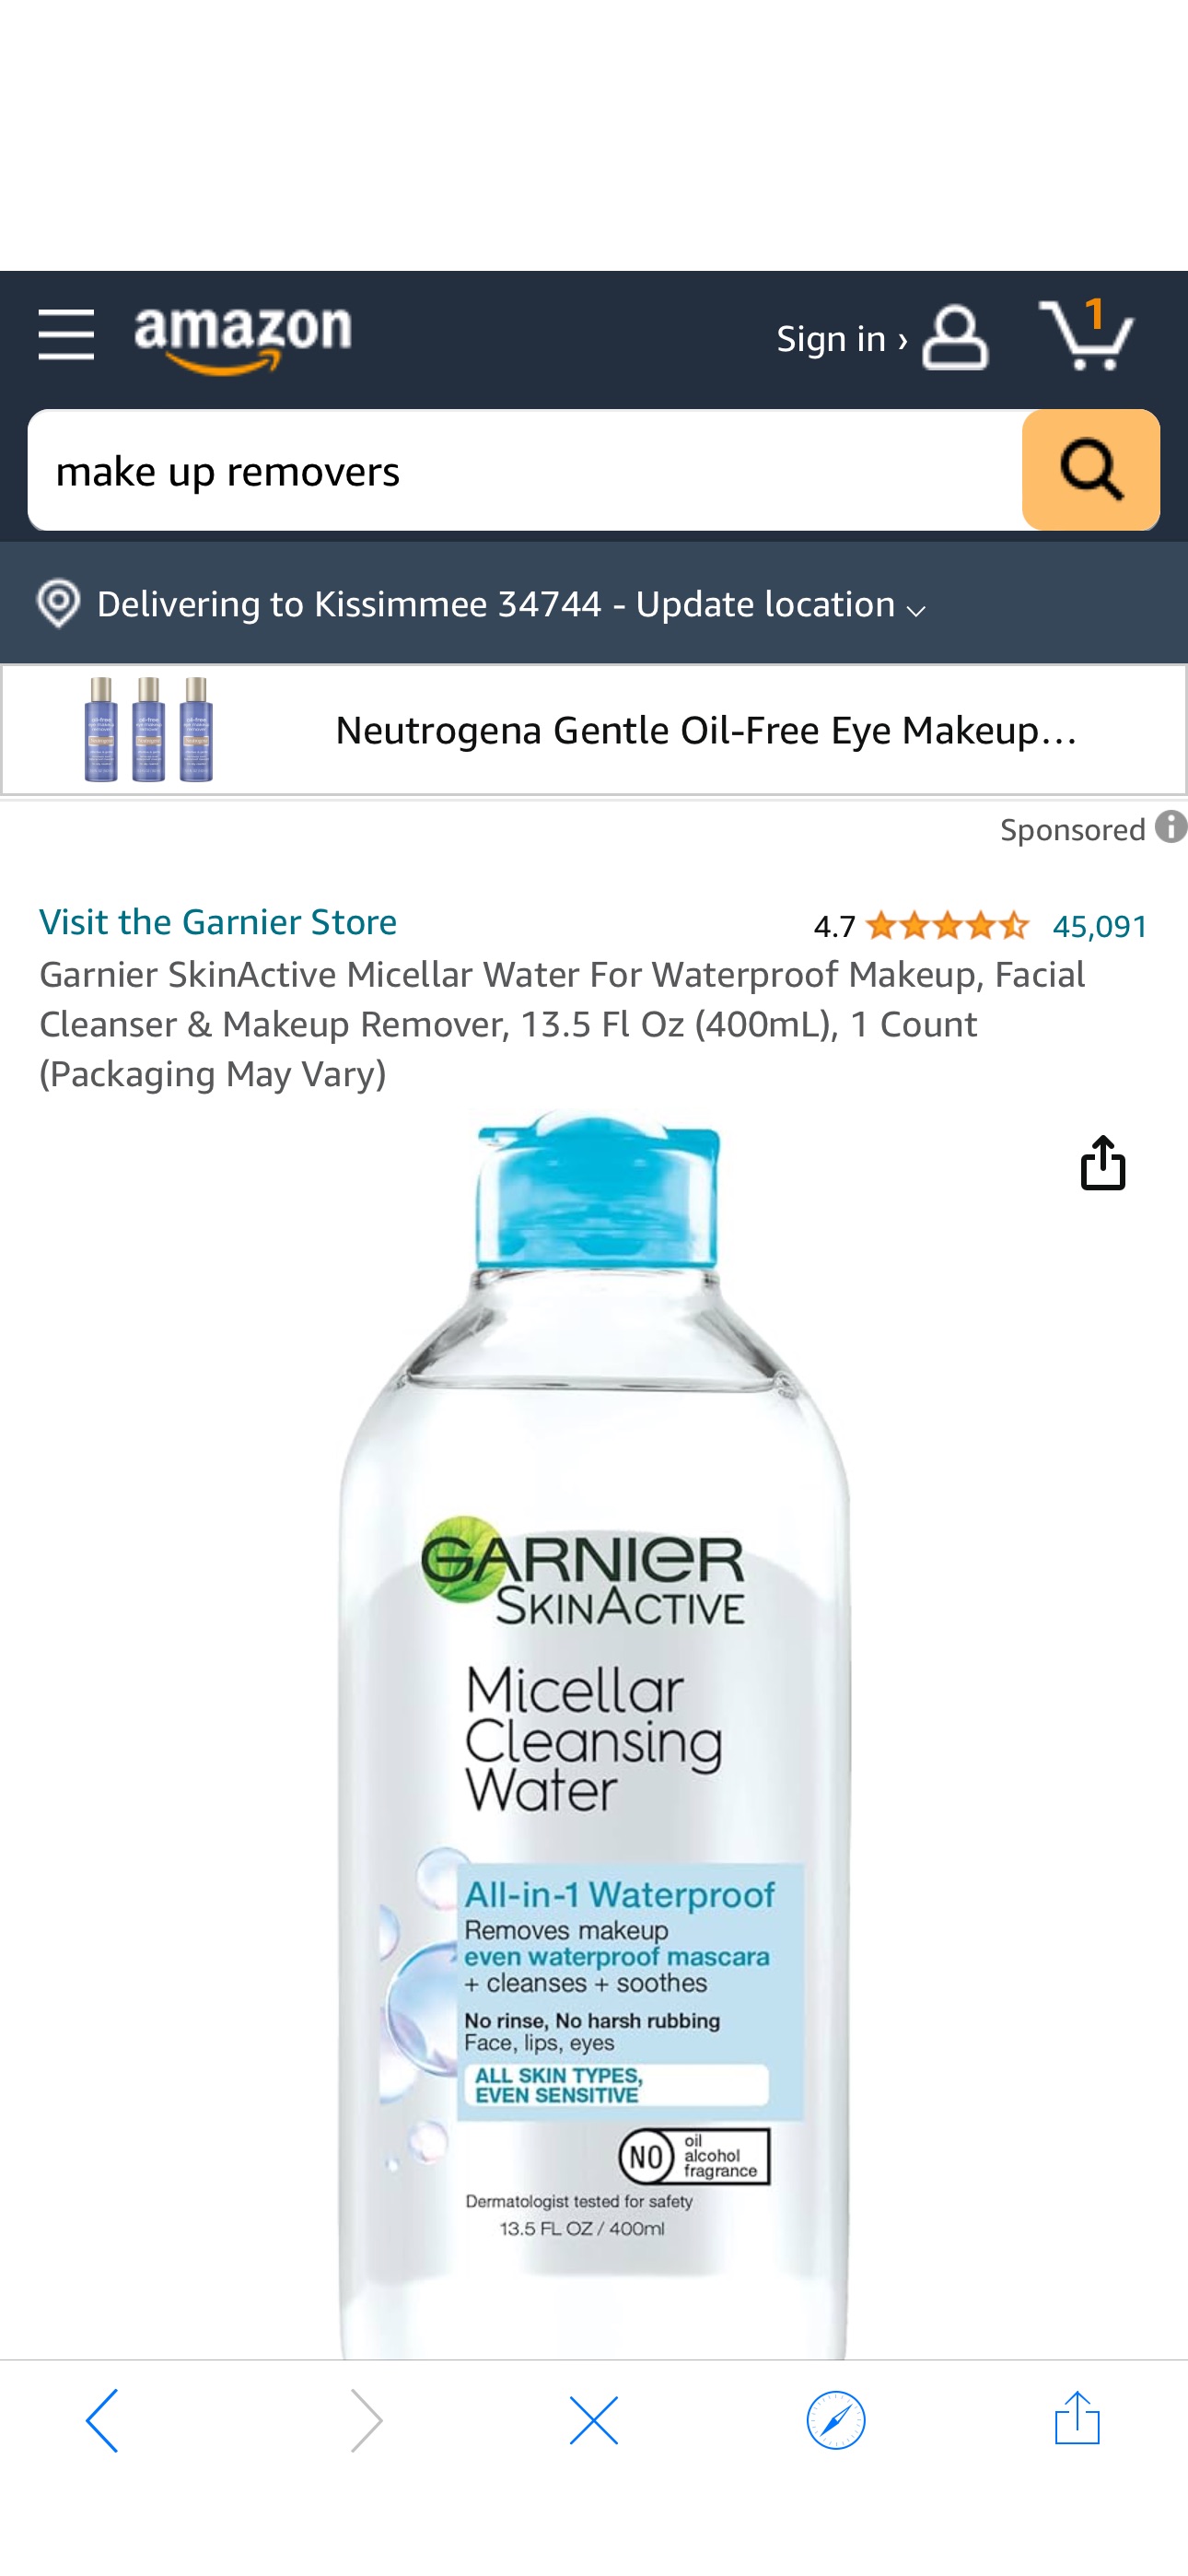 Amazon.com: Garnier SkinActive Micellar Water For Waterproof Makeup, Facial Cleanser & Makeup Remover, 13.5 Fl Oz (400mL), 1 Count (Packaging May Vary) : Beauty & Personal Care